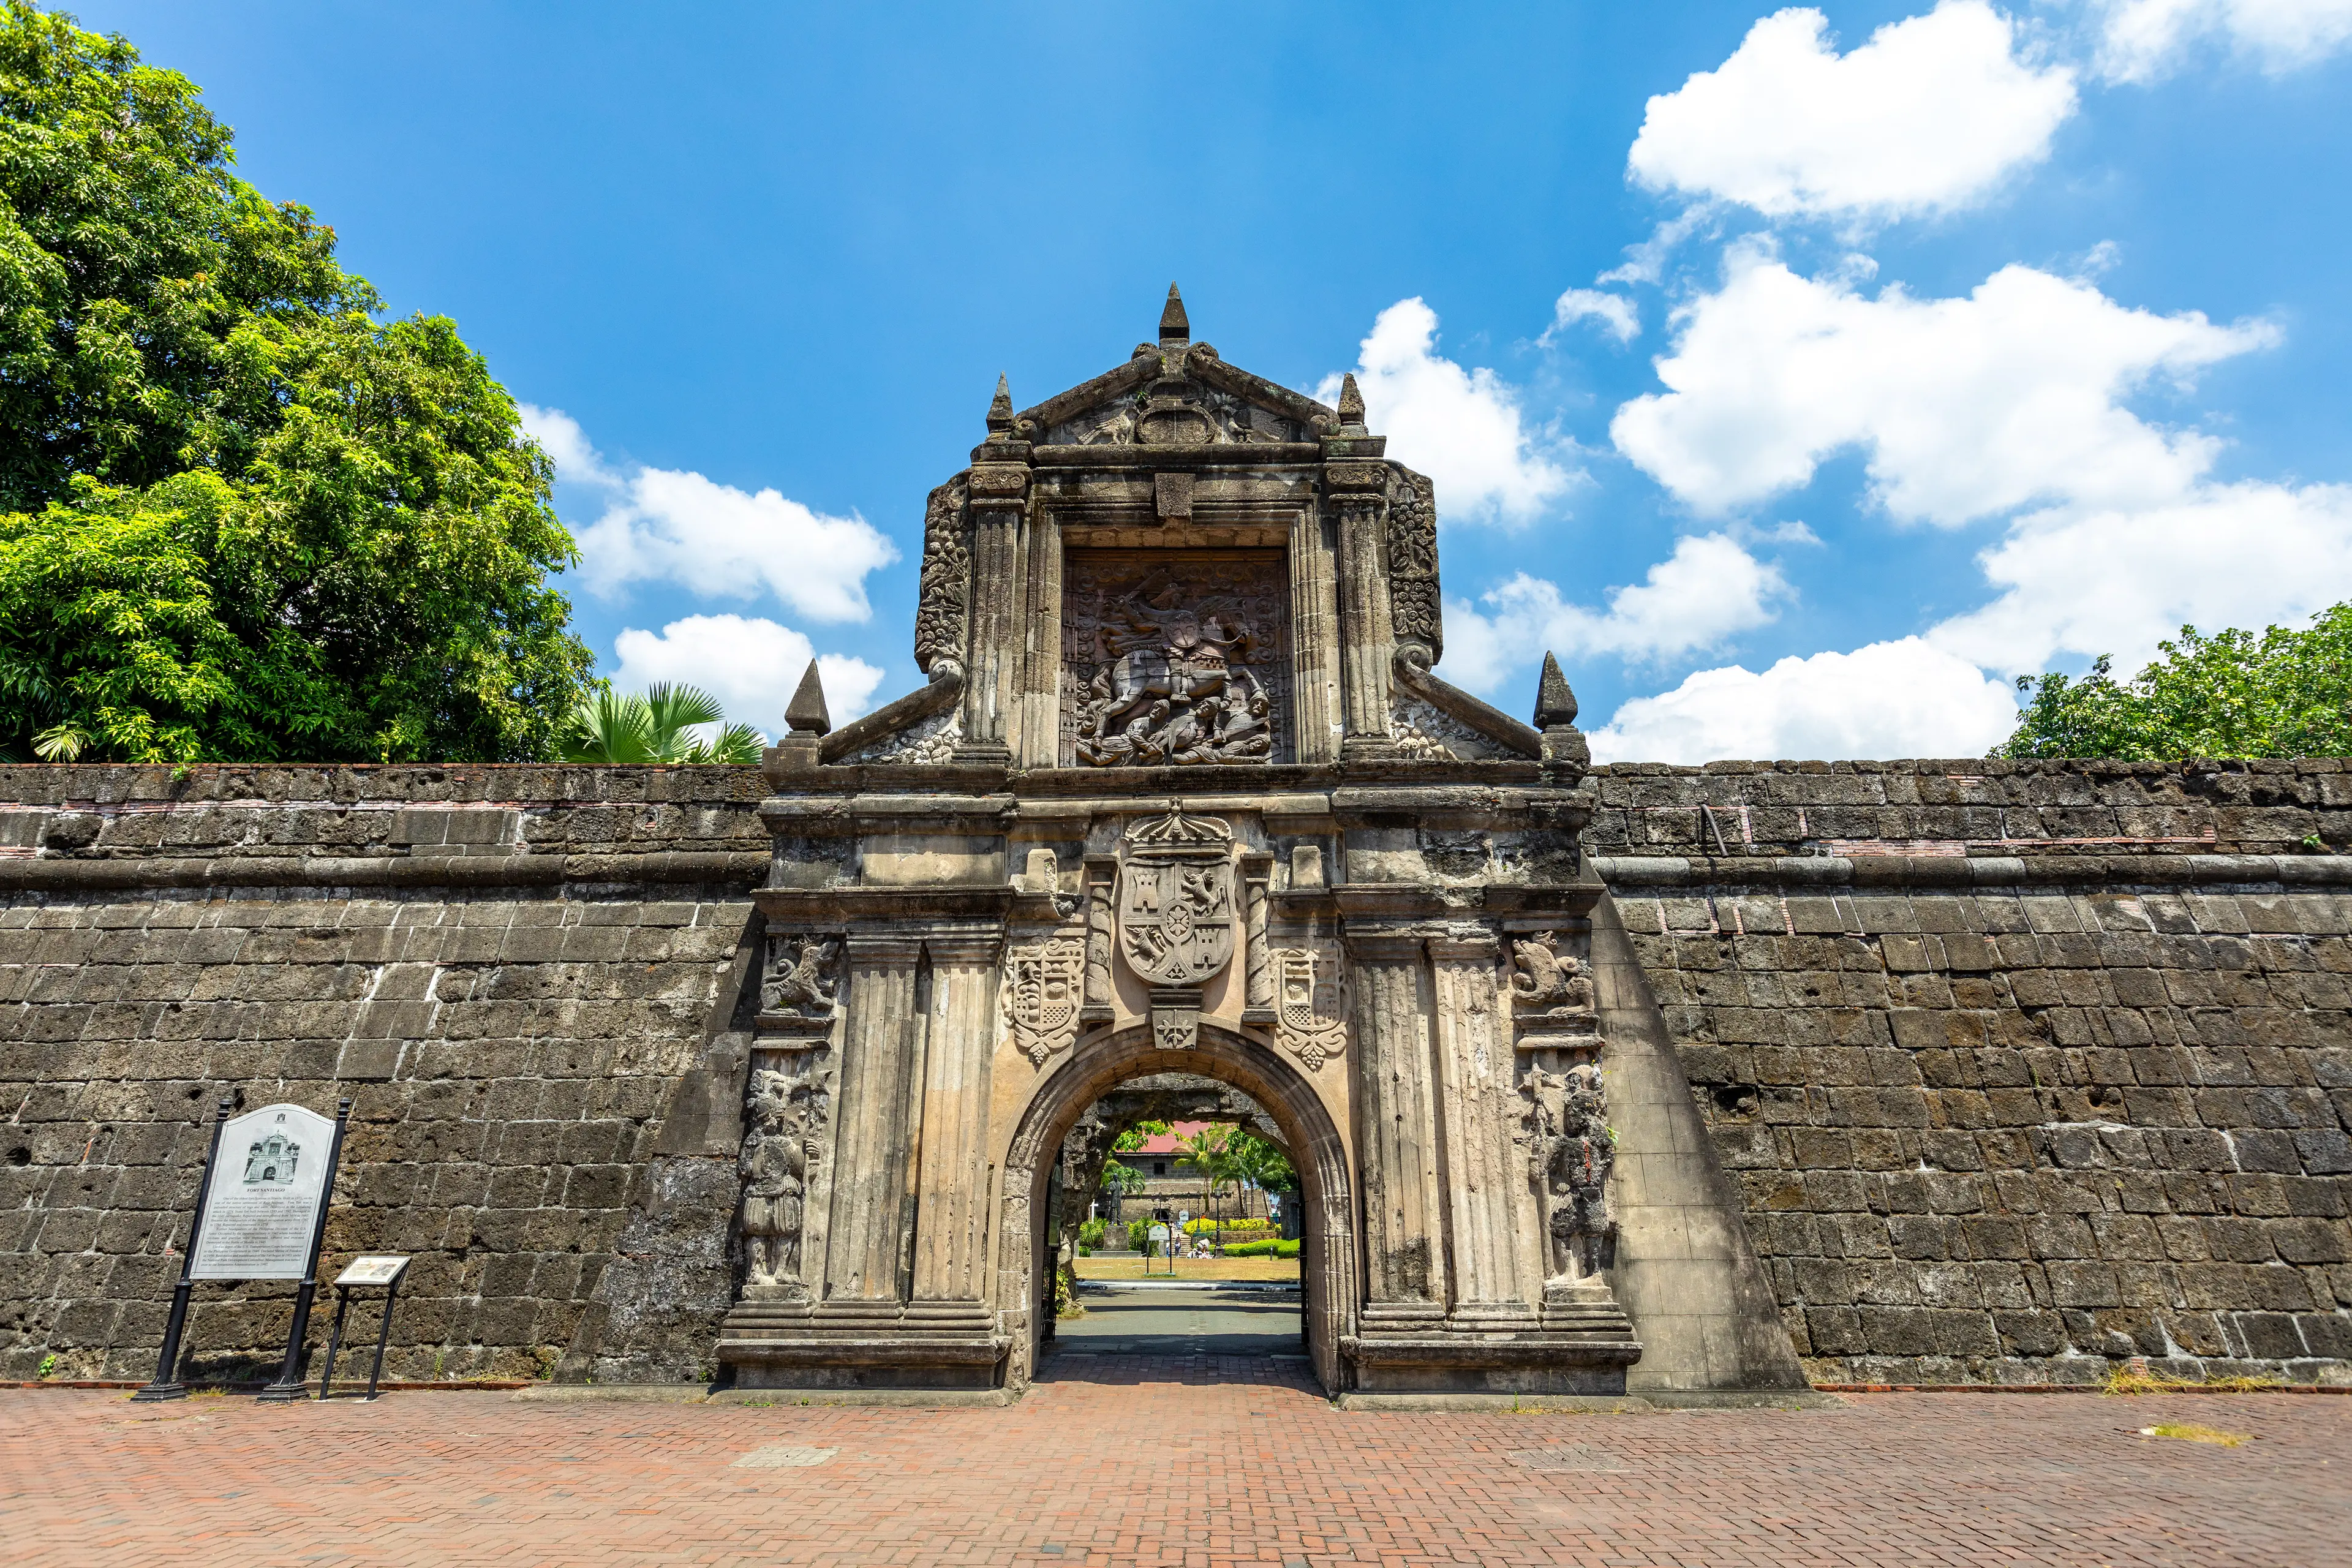 3-Day Essential Manila, Philippines Travel Itinerary